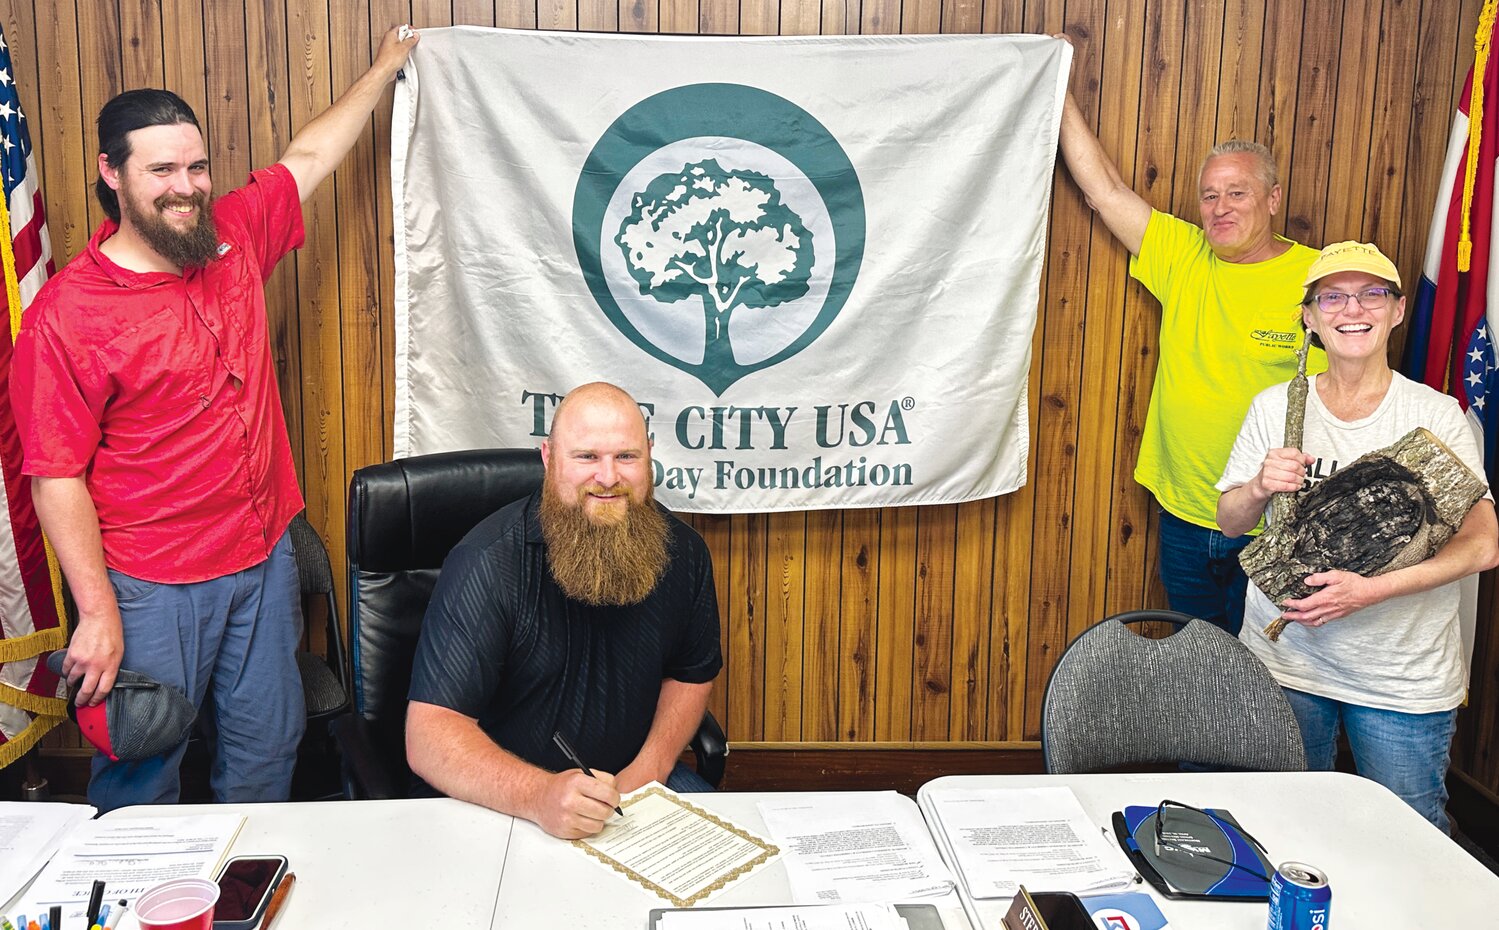 Mayor Jeremy Dawson (seated) signs an Arbor Day proclamation as Parks board member Matthew Klusmeyer and public works director Danny Dougherty hold up the city’s new Tree City USA flag. Alderwoman Bekki Galloway holds piece of tree that was cut after it became damaged by rubbing against a power line.